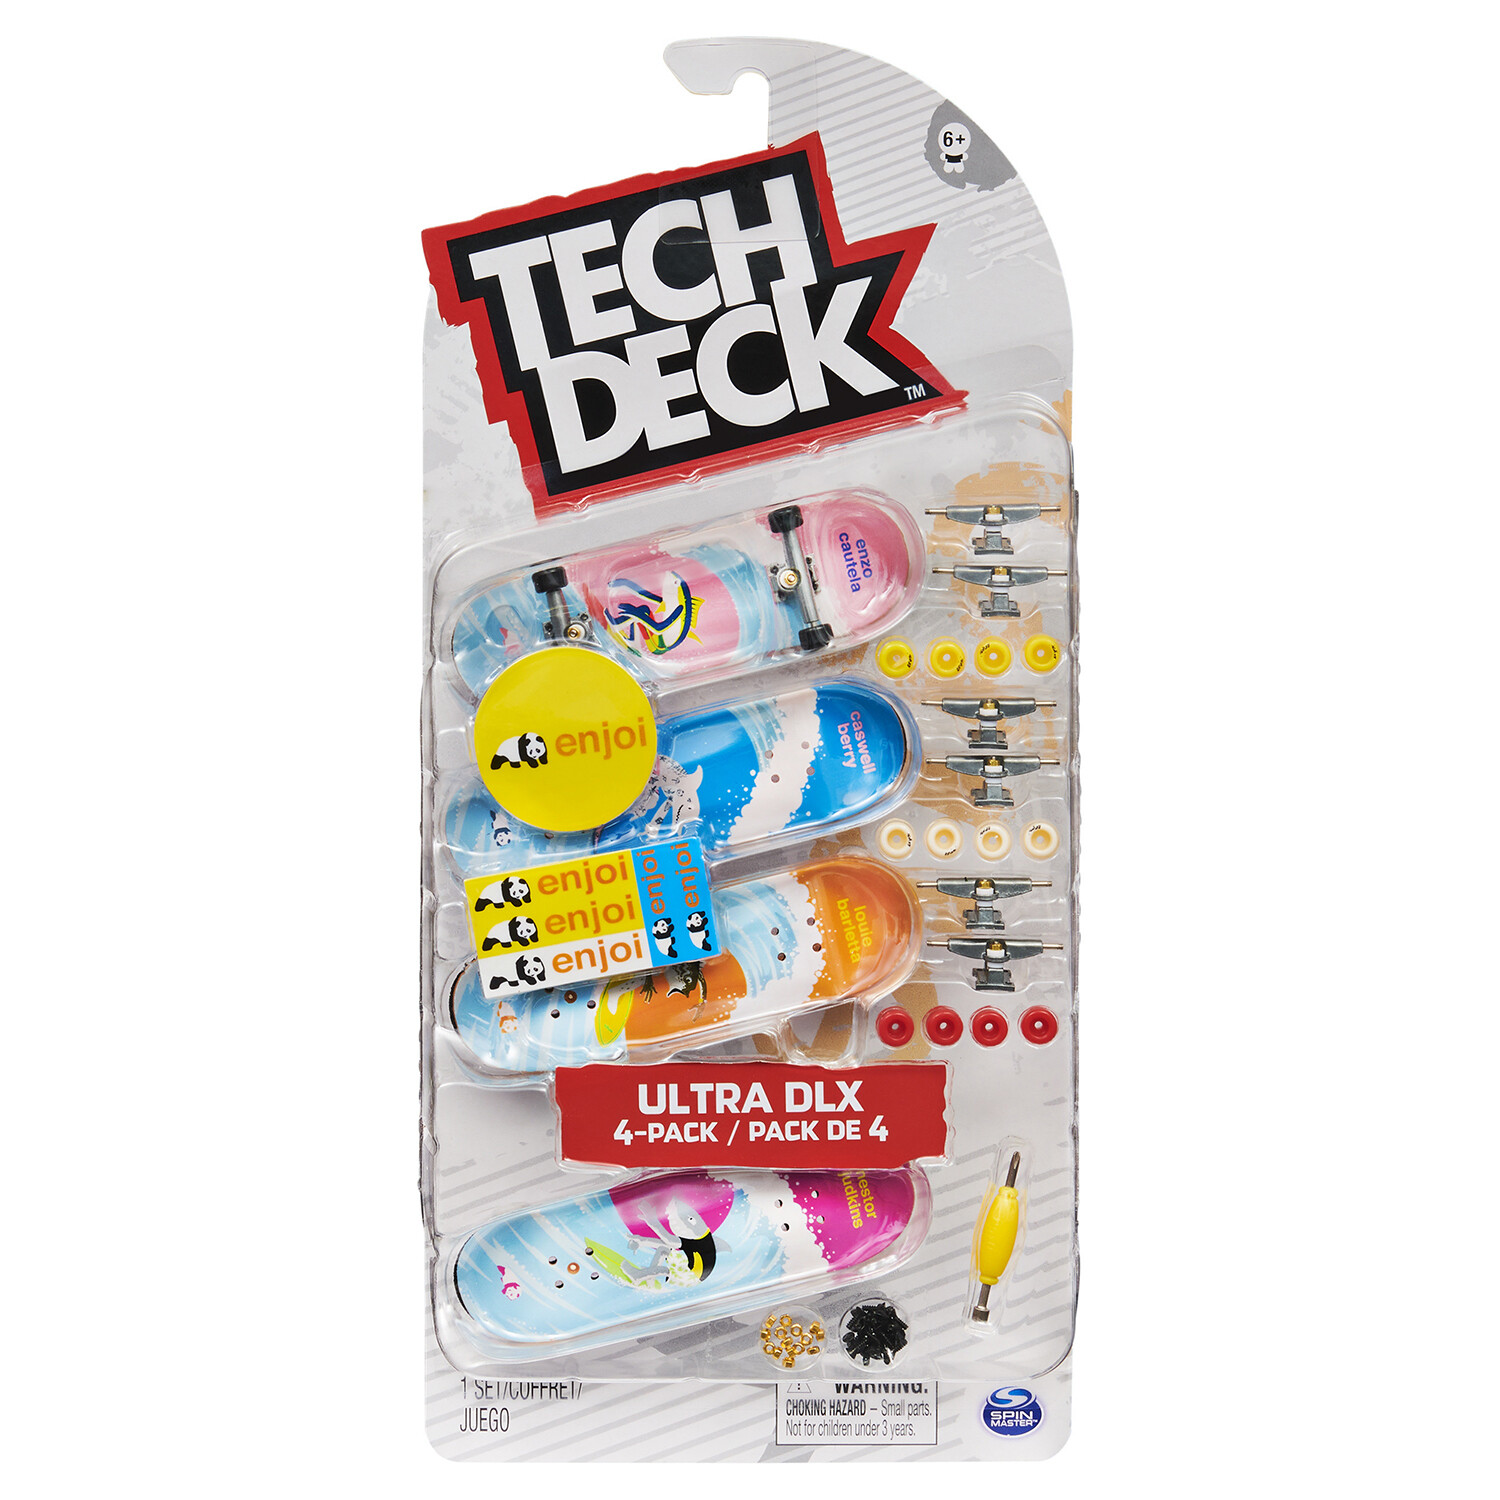 Tech Deck Ultra DLX Skateboards Figures in Assorted Style 4 Pack Image 2